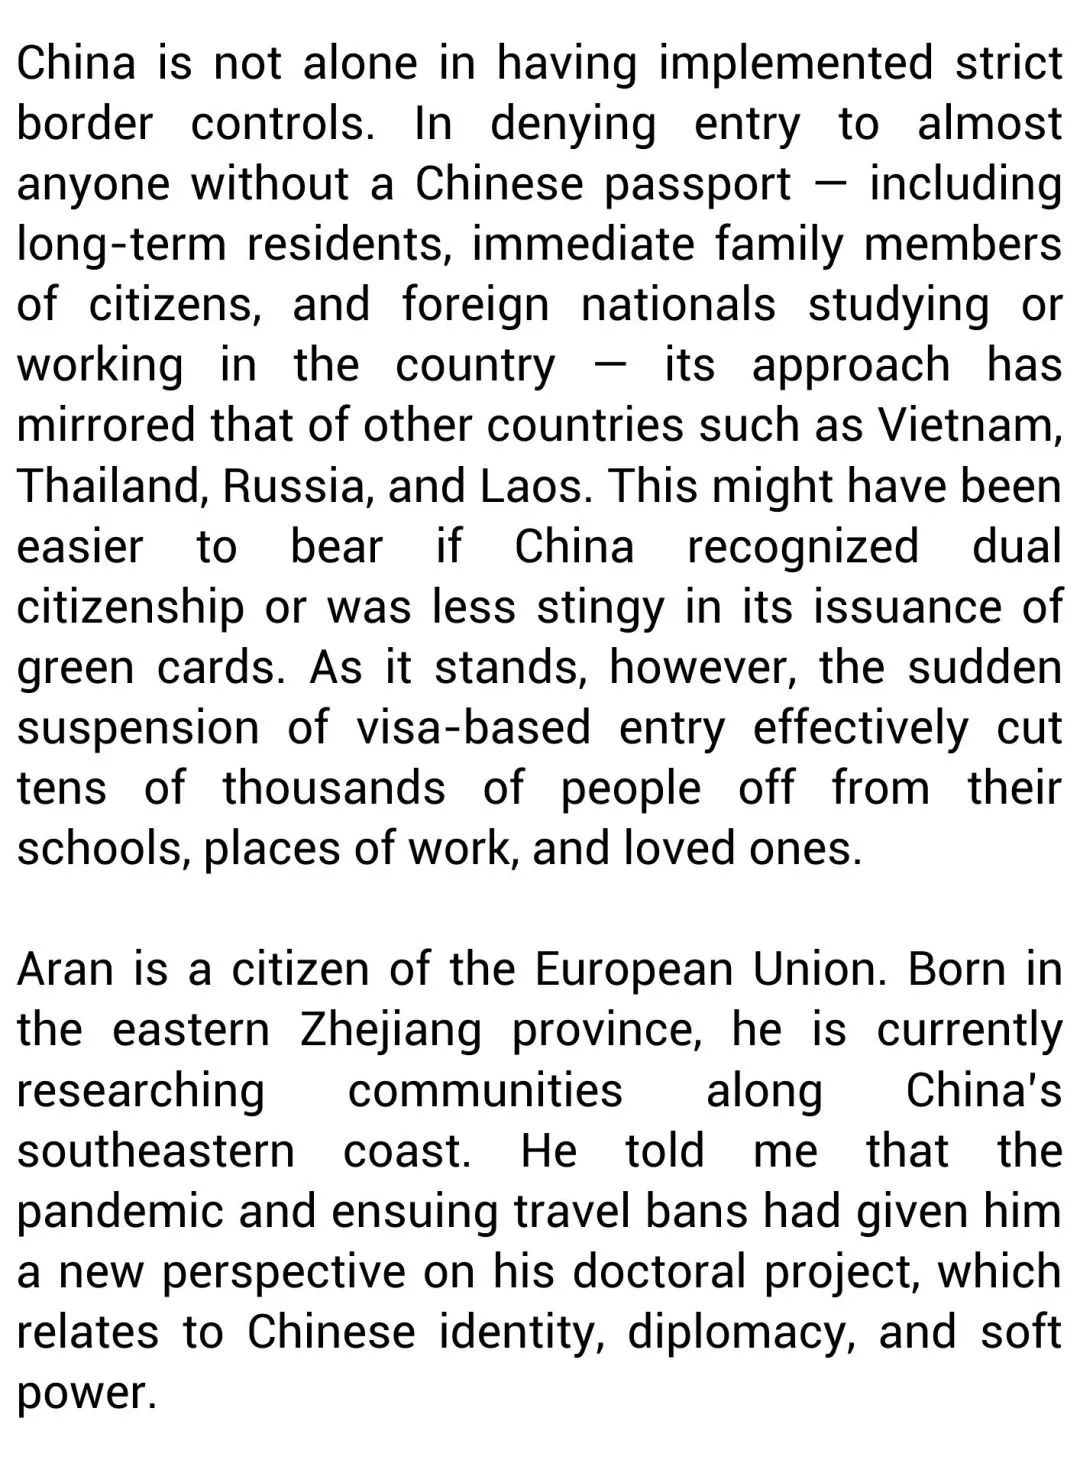 How China's Entry Bans Split Transnational Families